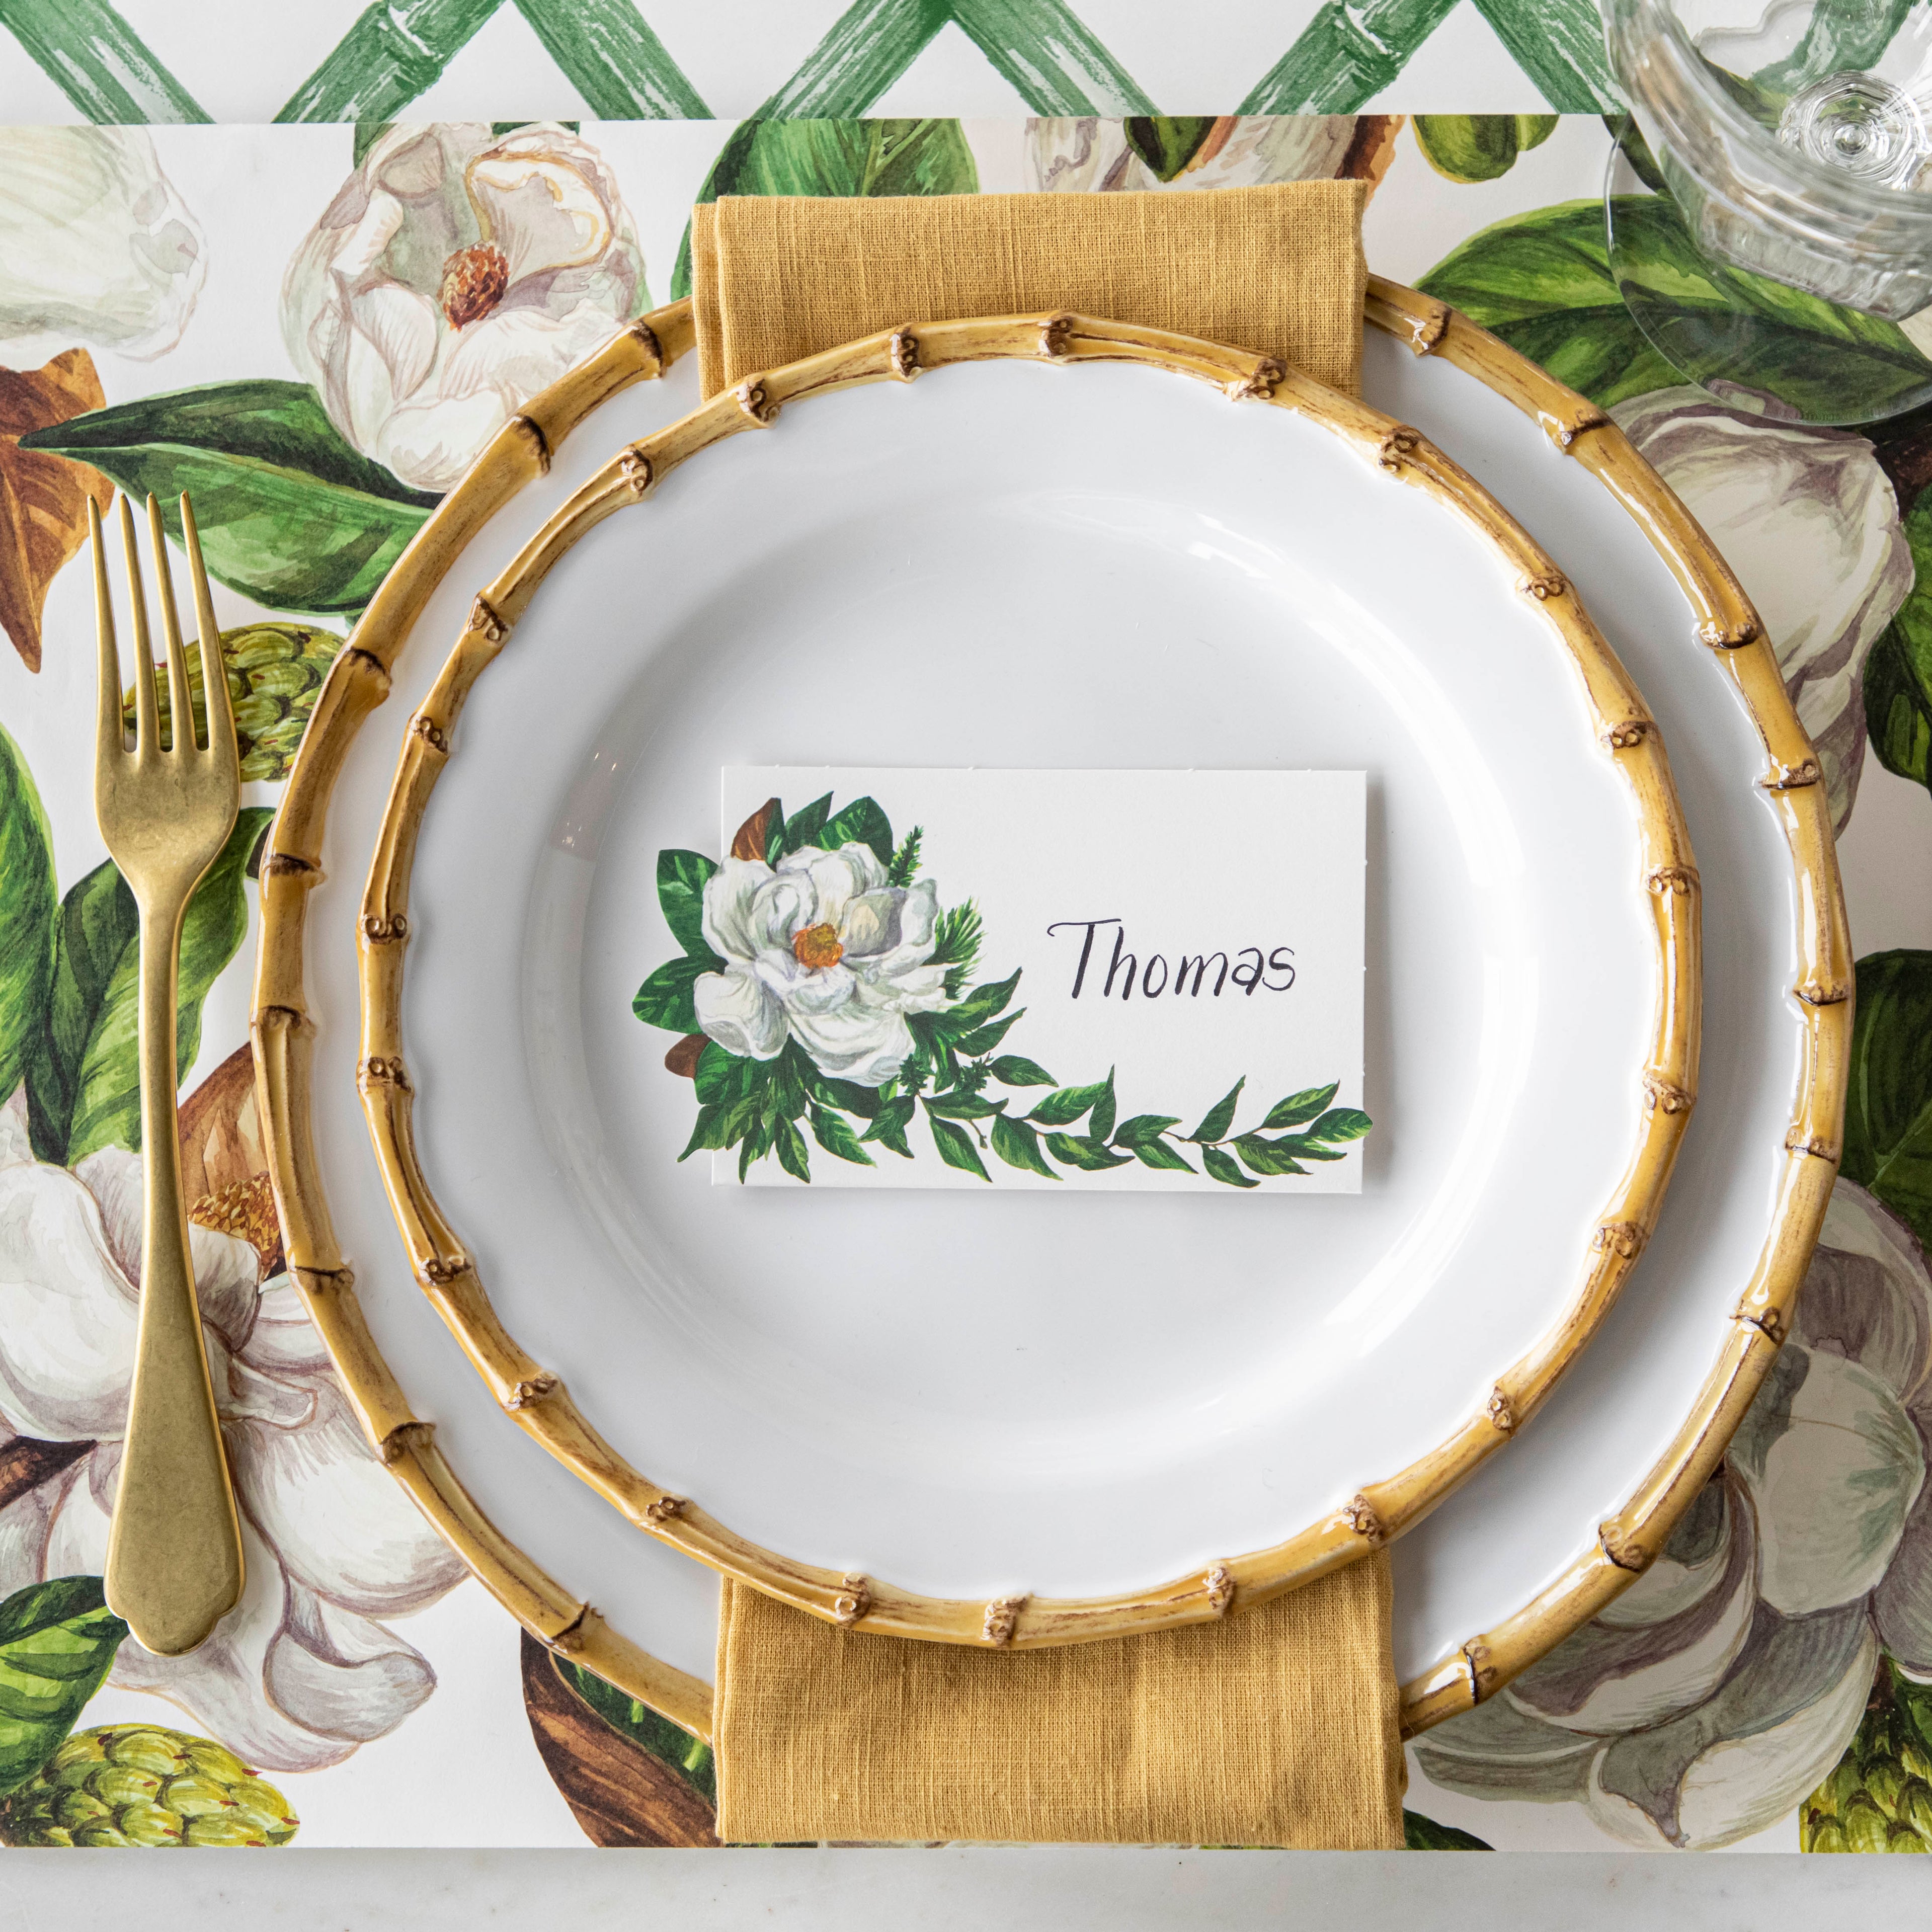 Top-down view of an elegant place setting featuring a Magnolia Place Card labeled &quot;Thomas&quot; laying flat on the plate.